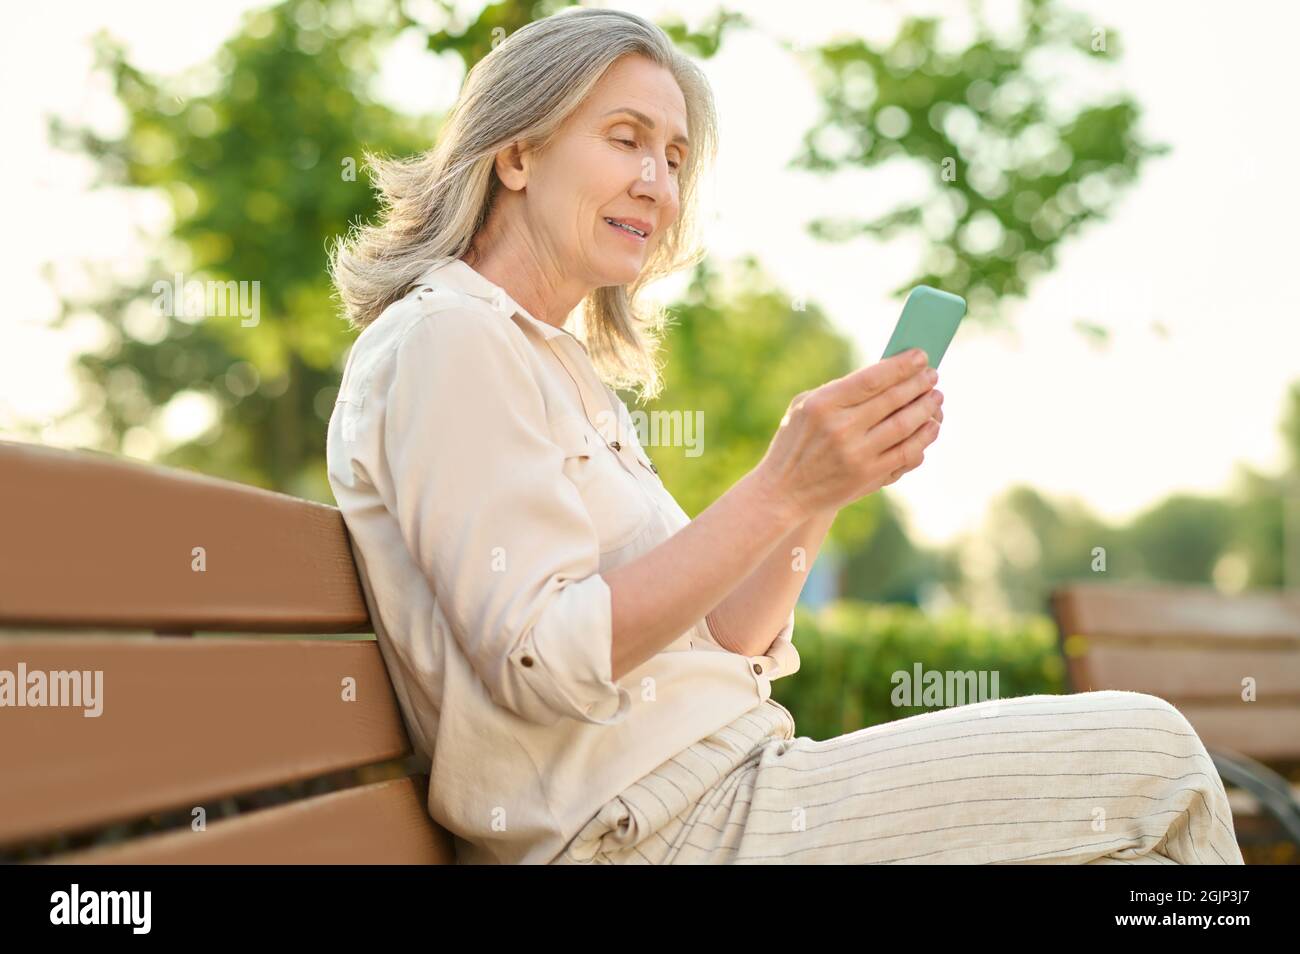 Serious woman with smartphone on bench Stock Photo